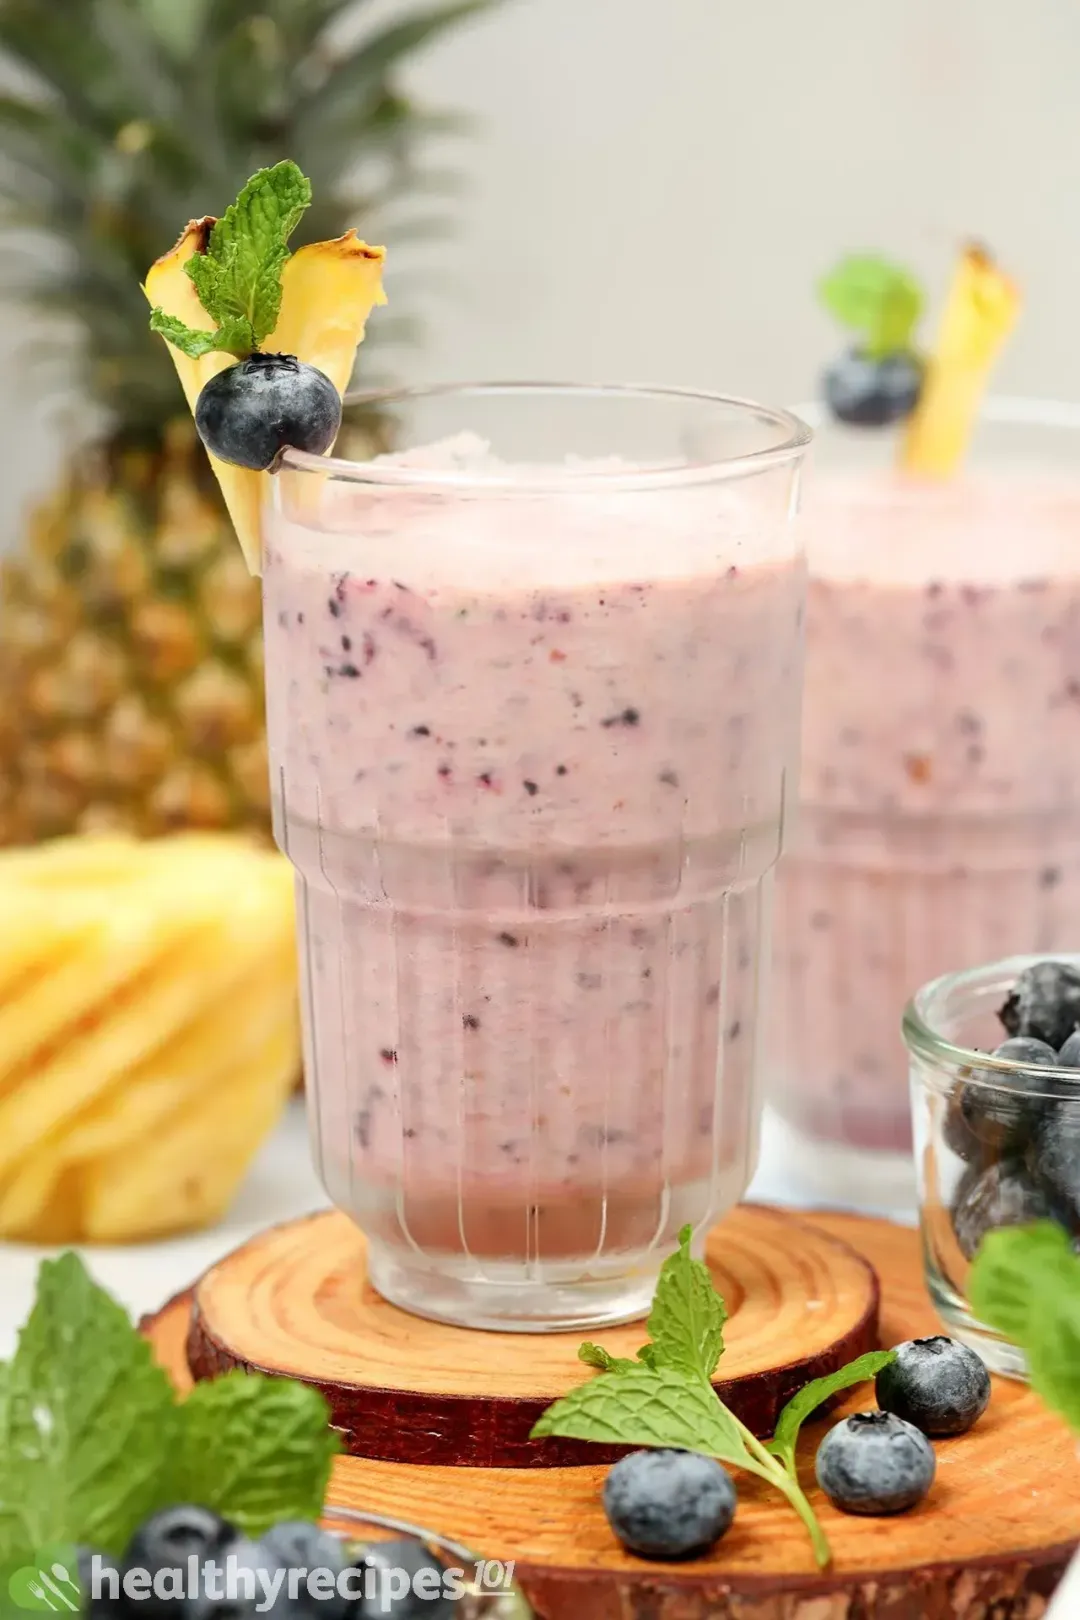 Is Pineapple Blueberry Smoothie Healthy